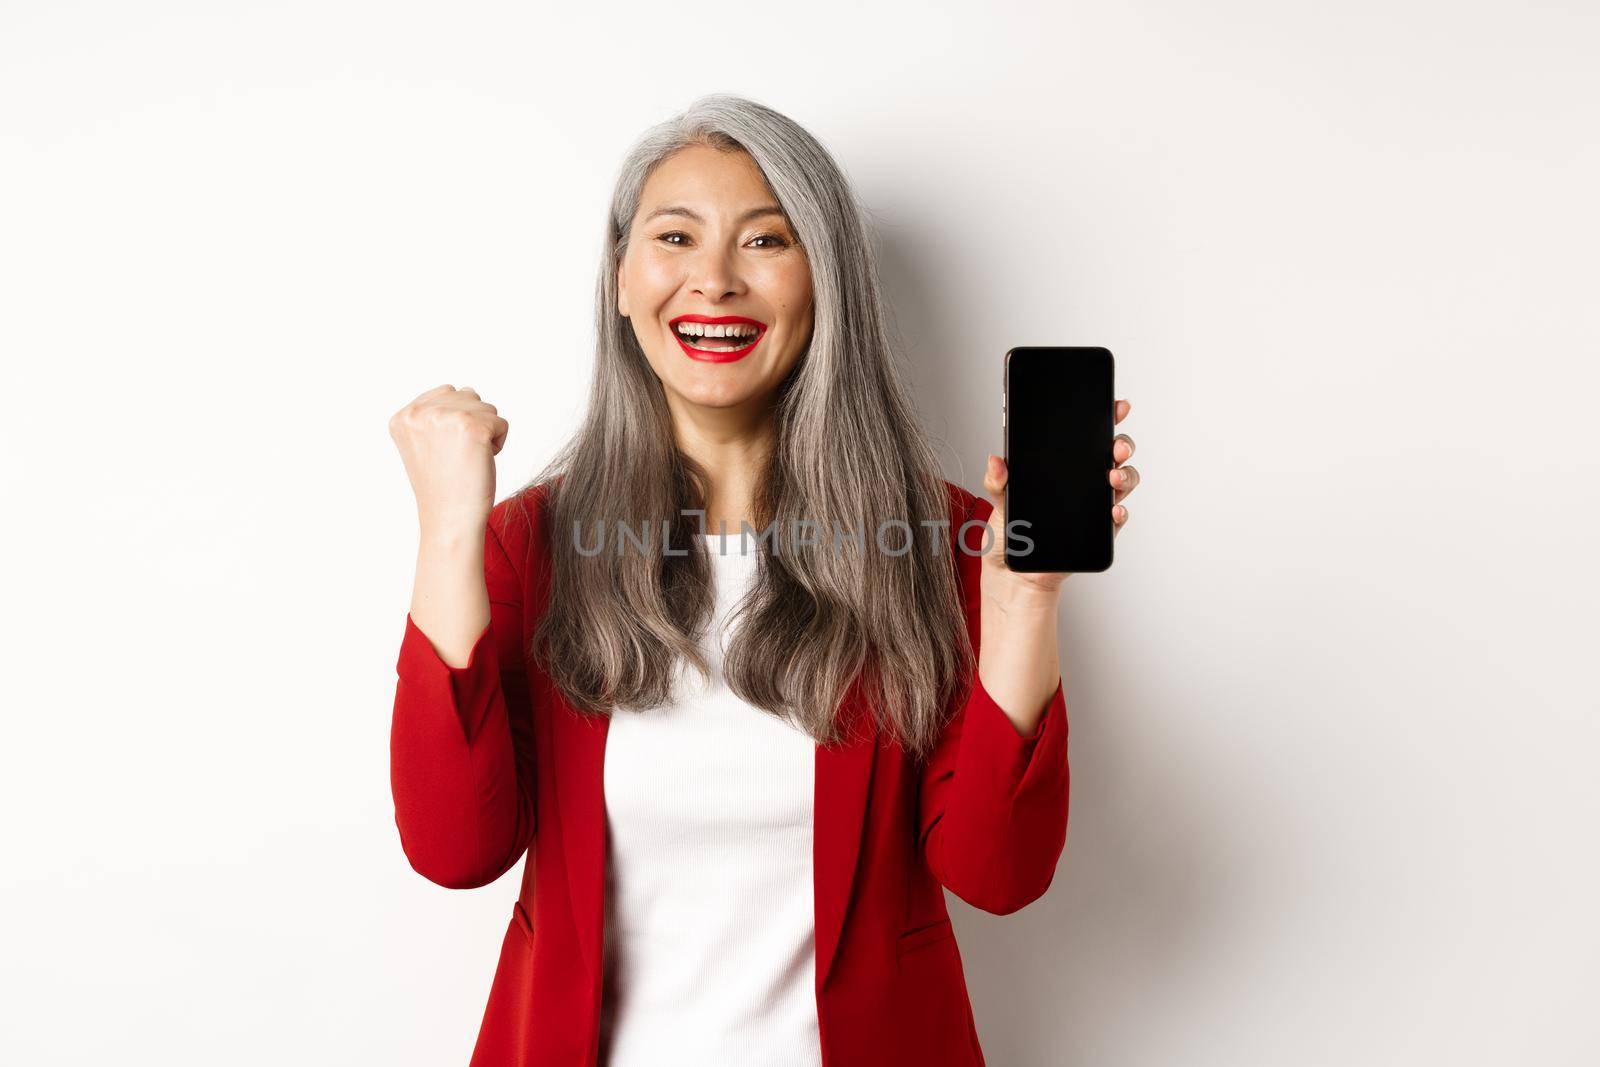 Success. Asian senior woman showing smartphone blank screen and fist pump, winning prize online, standing over white background.